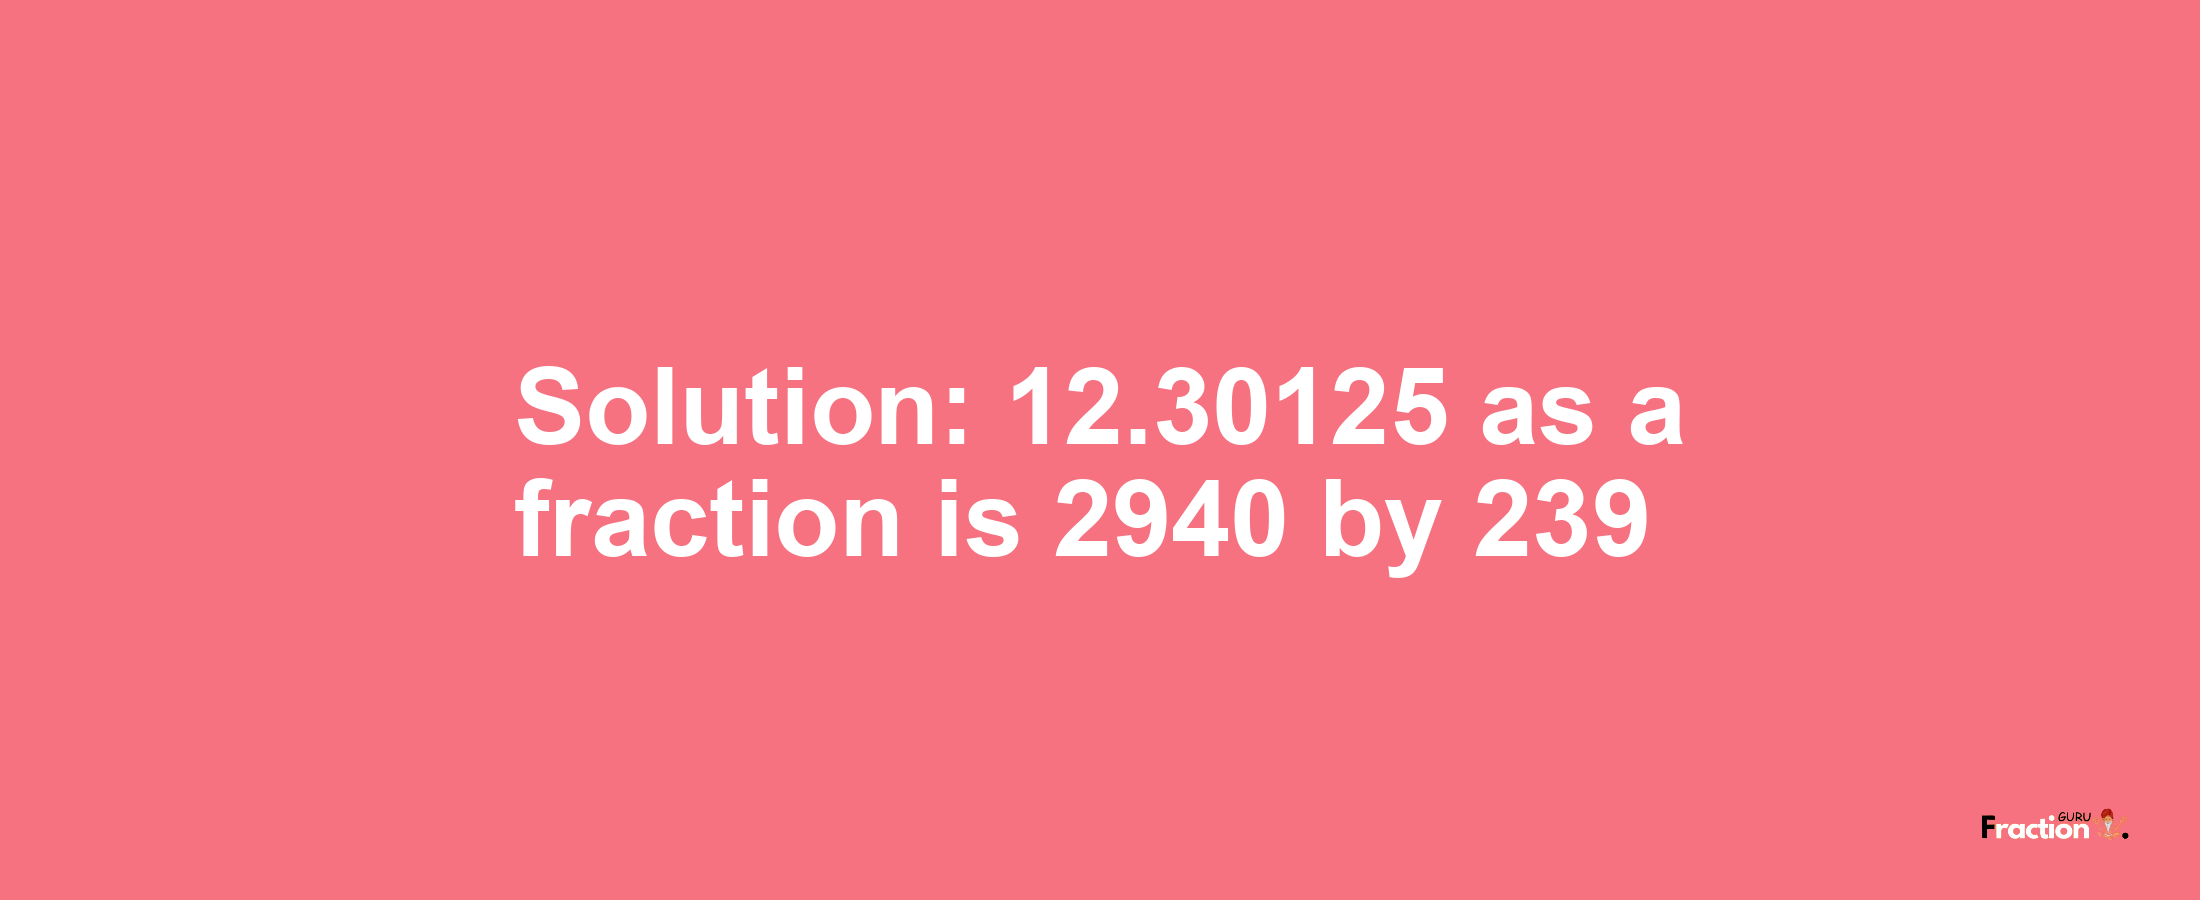 Solution:12.30125 as a fraction is 2940/239